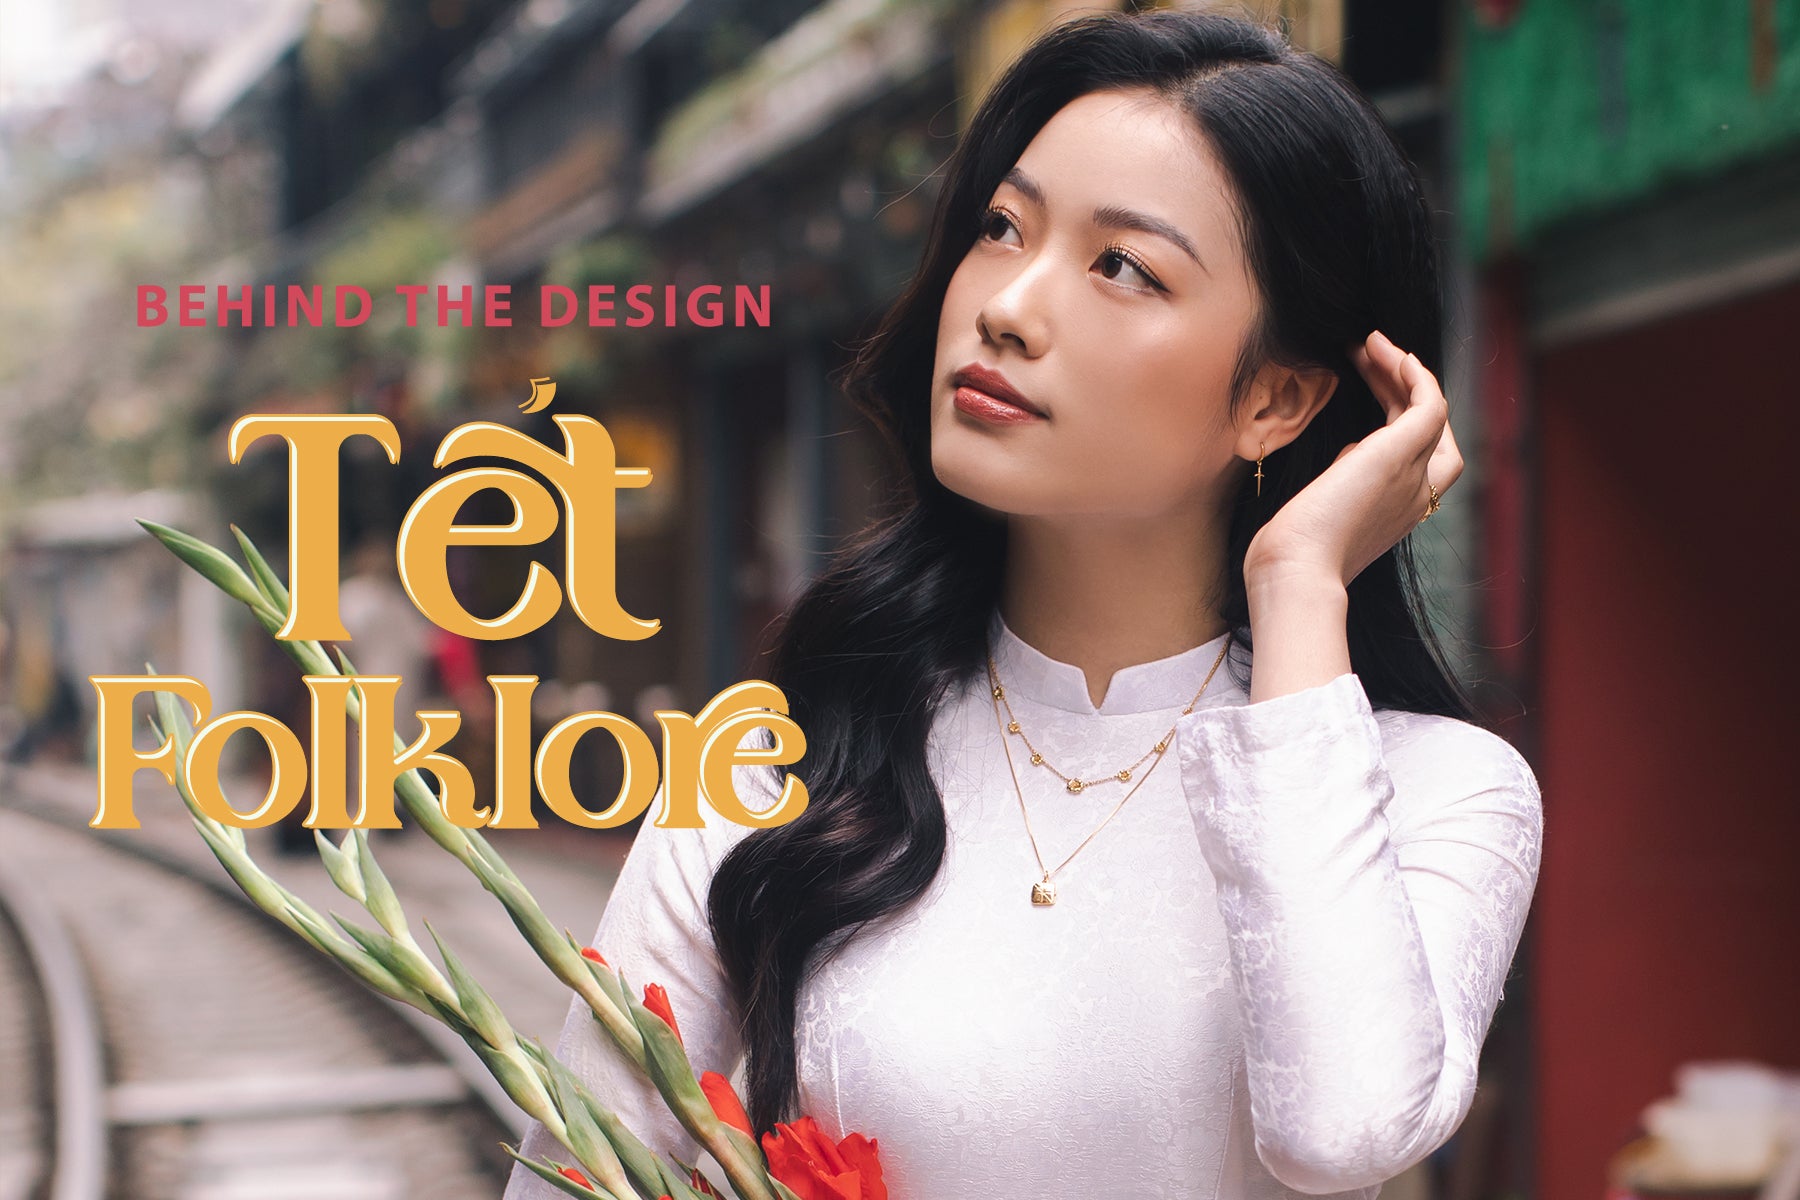 Behind the Design - Tet Folklore Collection